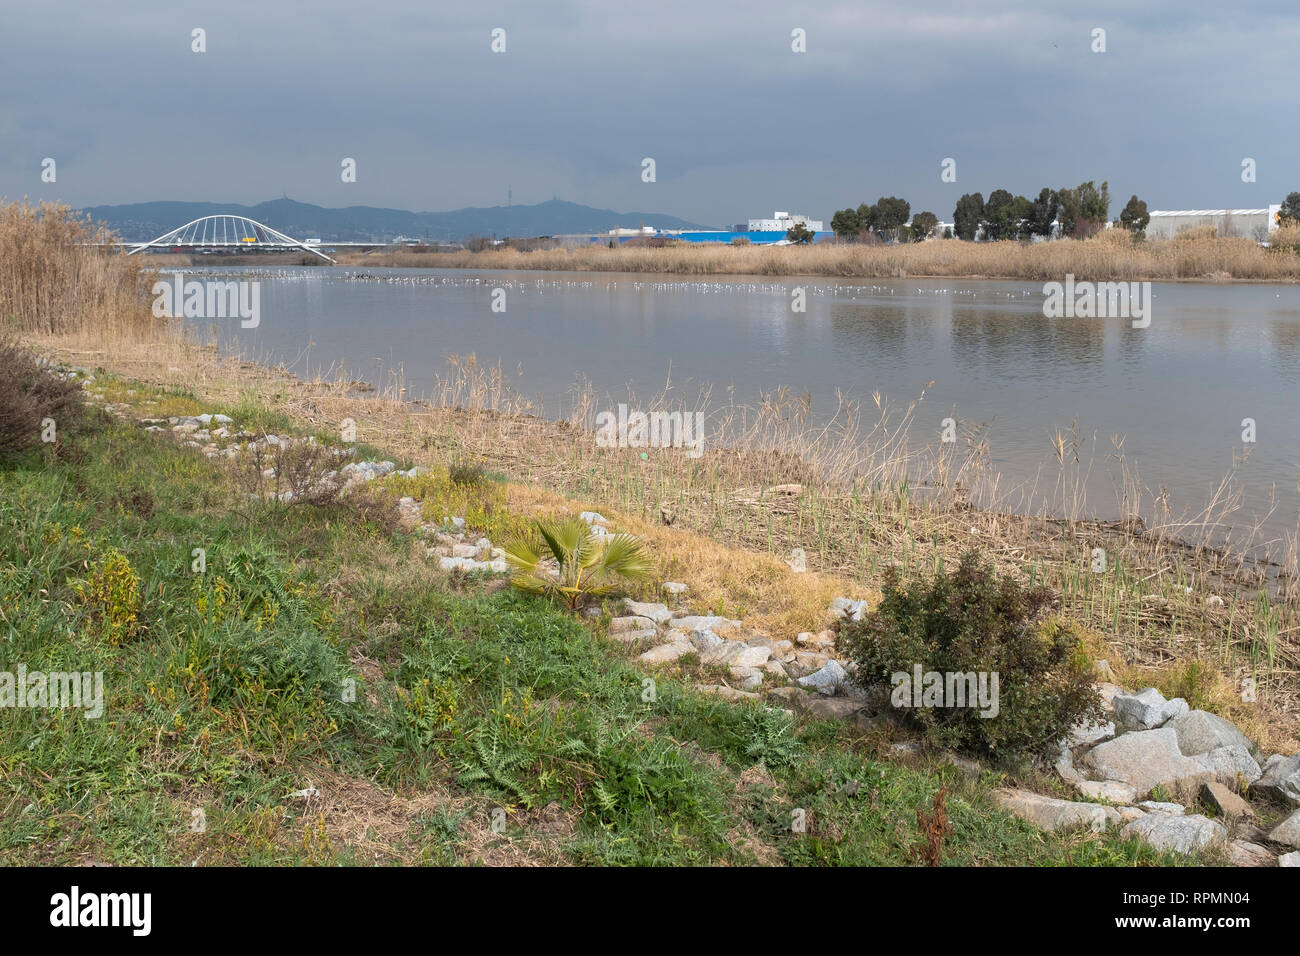 Llobregat River with industrial area in background and garbage in the foreground. Natural Areas of the Llobregat Delta. Catalonia. Spain. Stock Photo